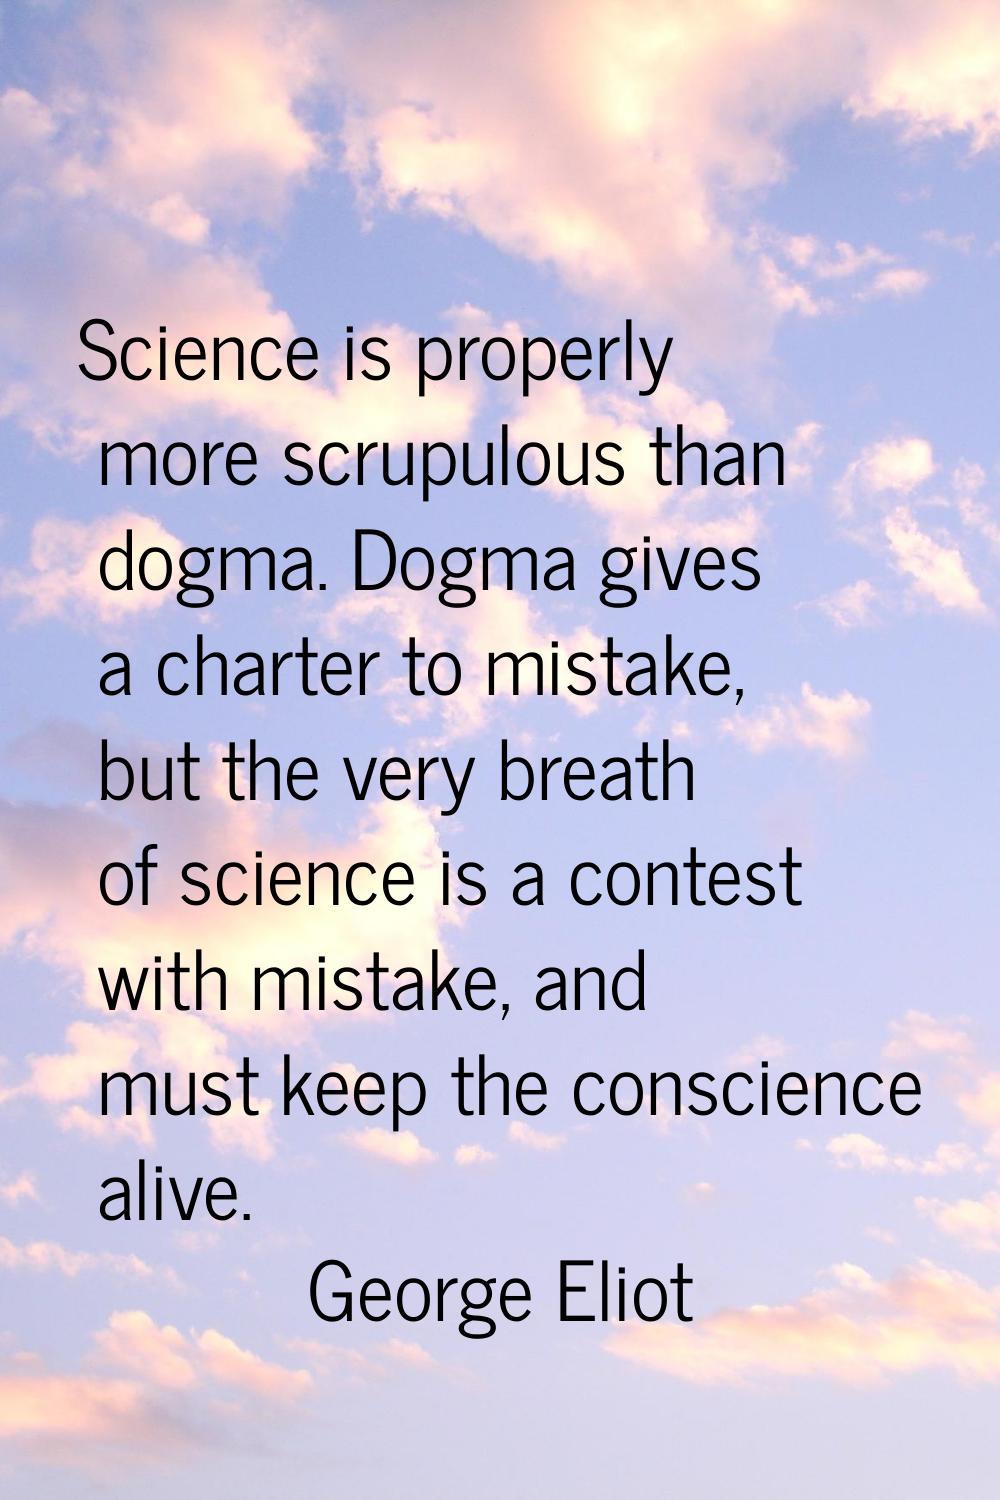 Science is properly more scrupulous than dogma. Dogma gives a charter to mistake, but the very brea